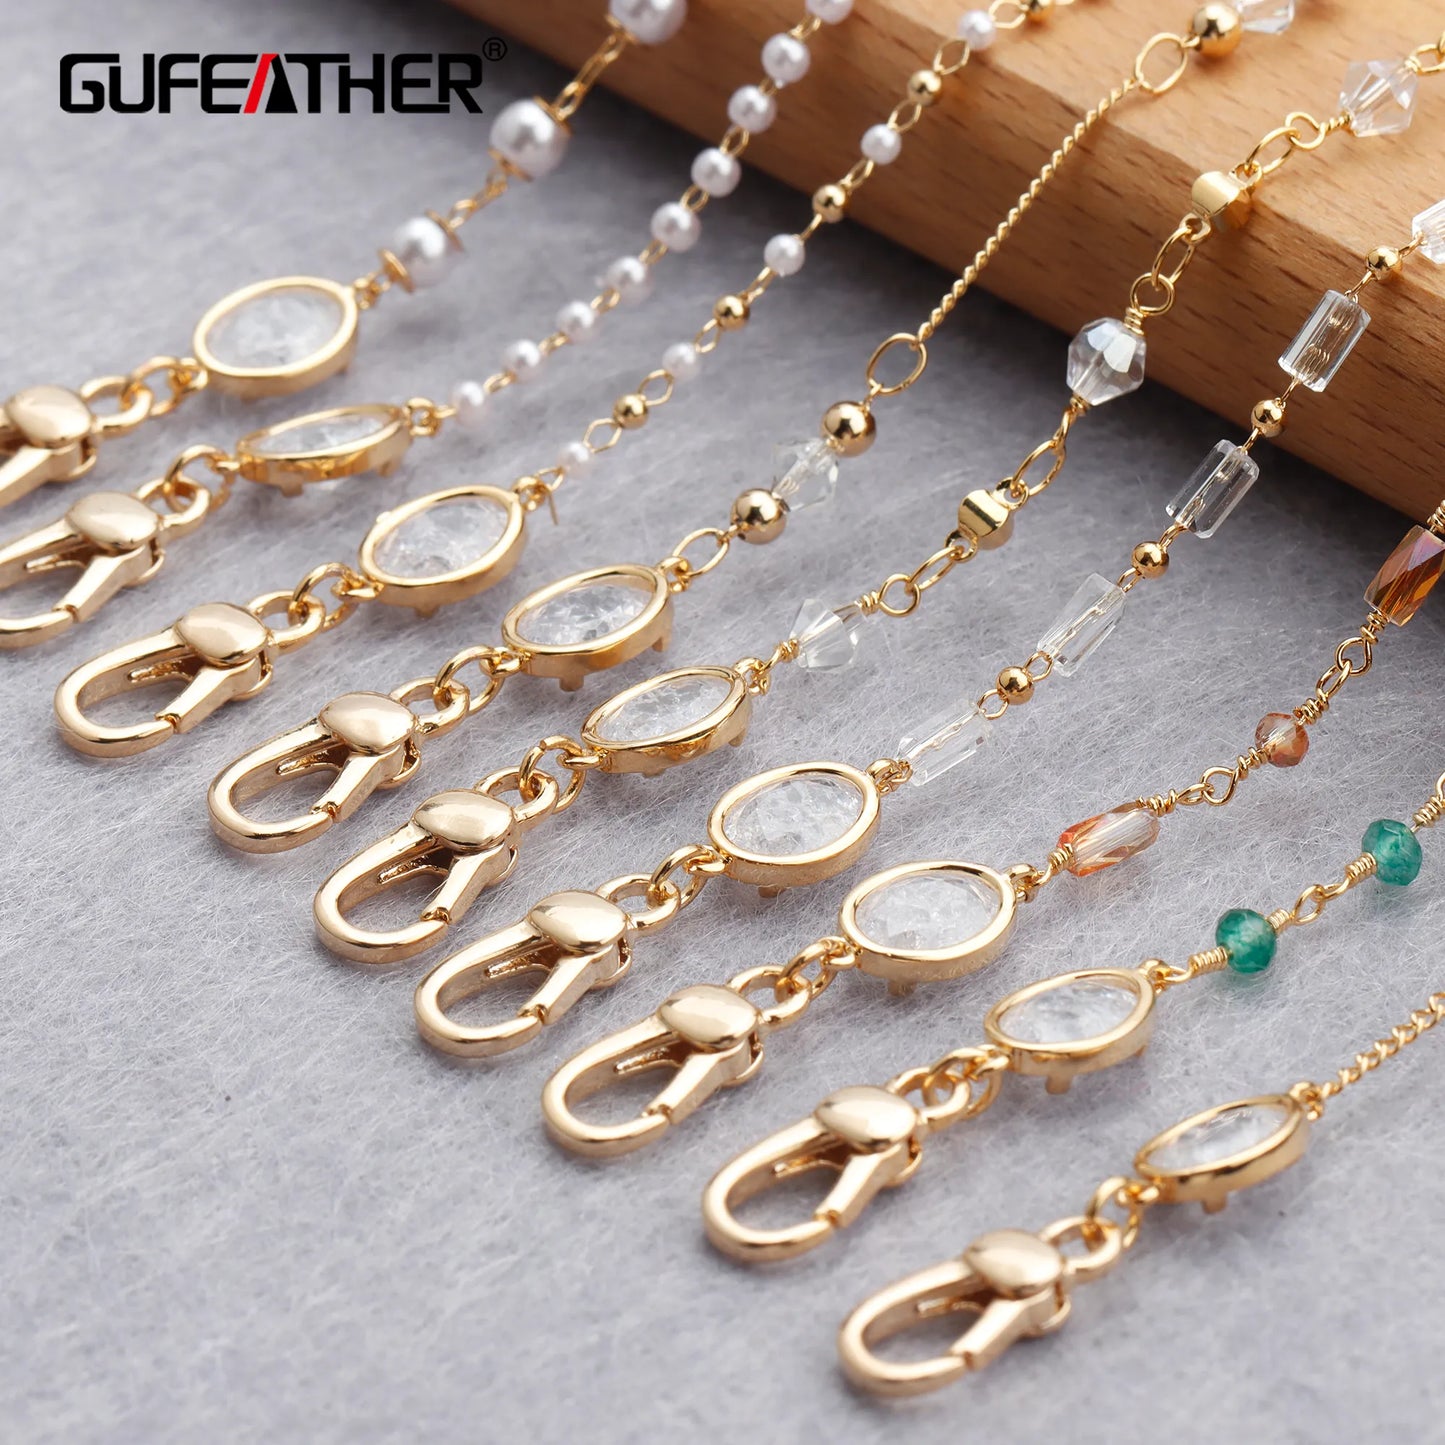 GUFEATHER M825,jewelry accessories,pass REACH,nickel free,eyeglass strap chain,18k gold plated,mask chain,fashion chain,76cm/pcs